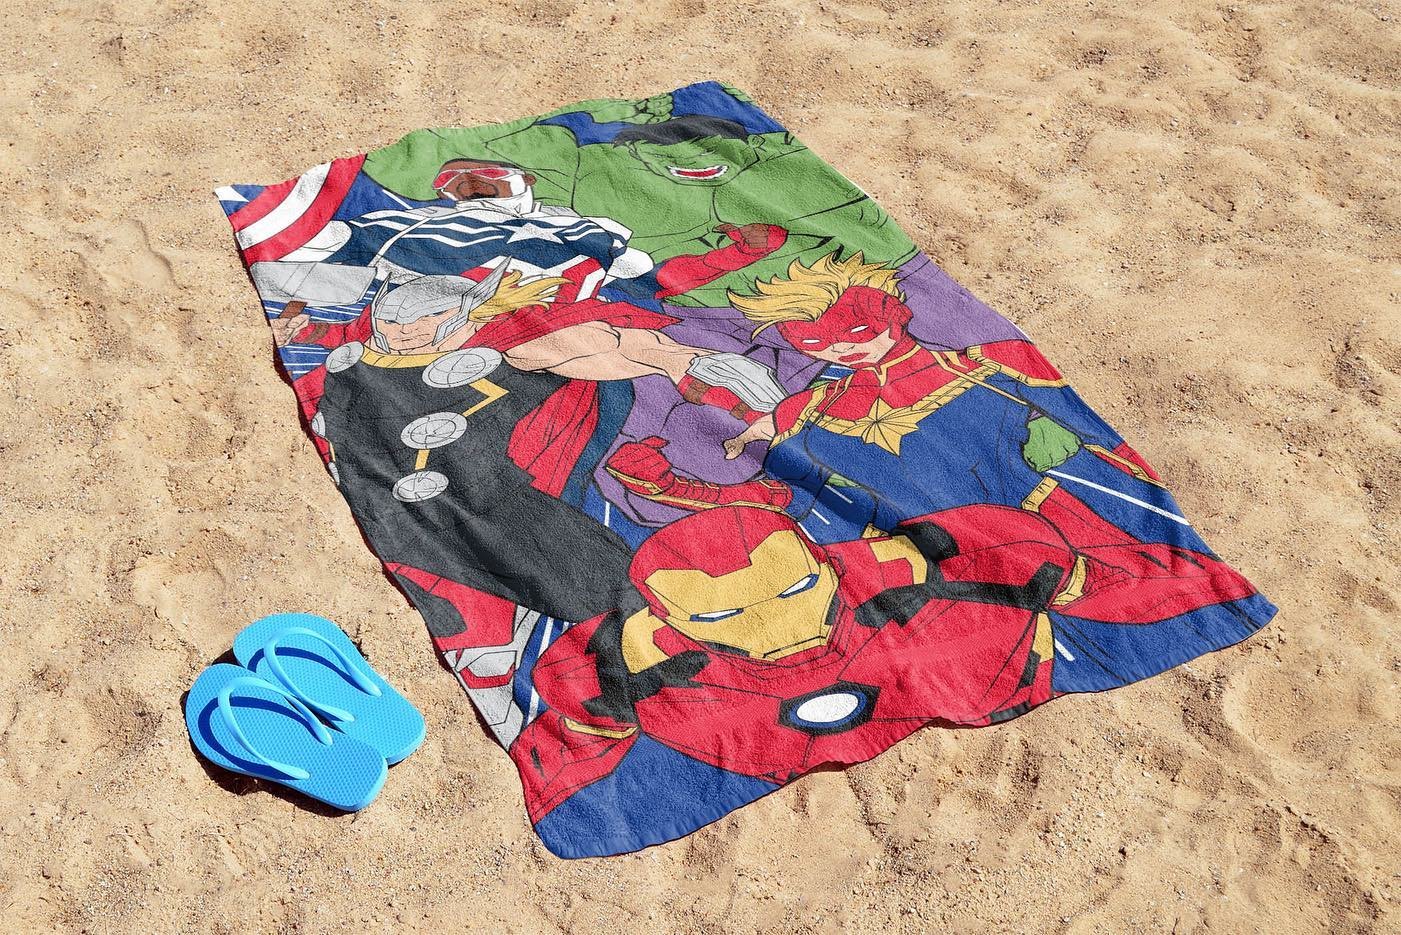 The weather is heating up - unleash your inner hero this summer with our Avengers beach towel! 🌊 Perfect for sunny days and epic adventures by the water. ⛱️☀️

Available now on Amazon 🛒🛍️

#avengers #beach #beachtowels #avengersassemble #jayfranco